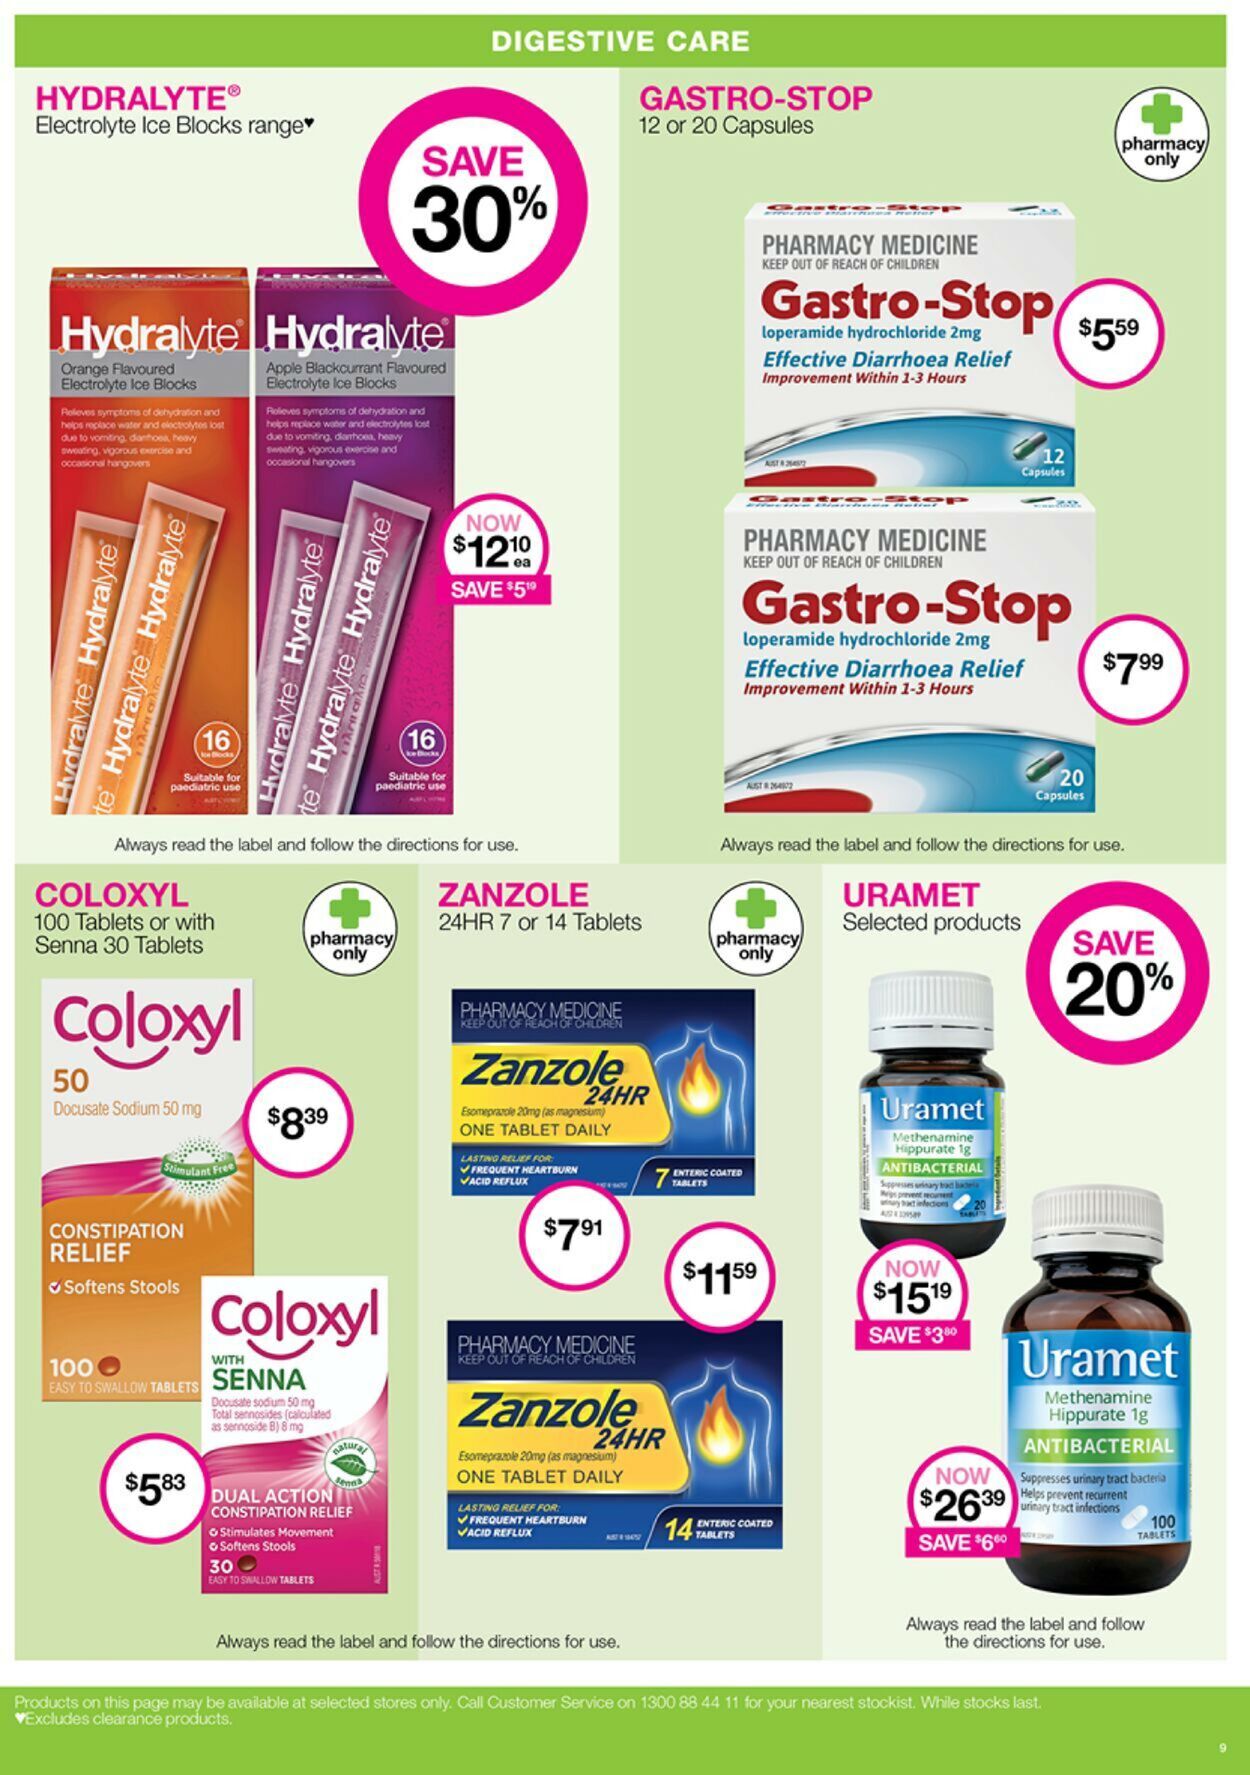 Priceline Pharmacy Catalogue from 06/07/2023